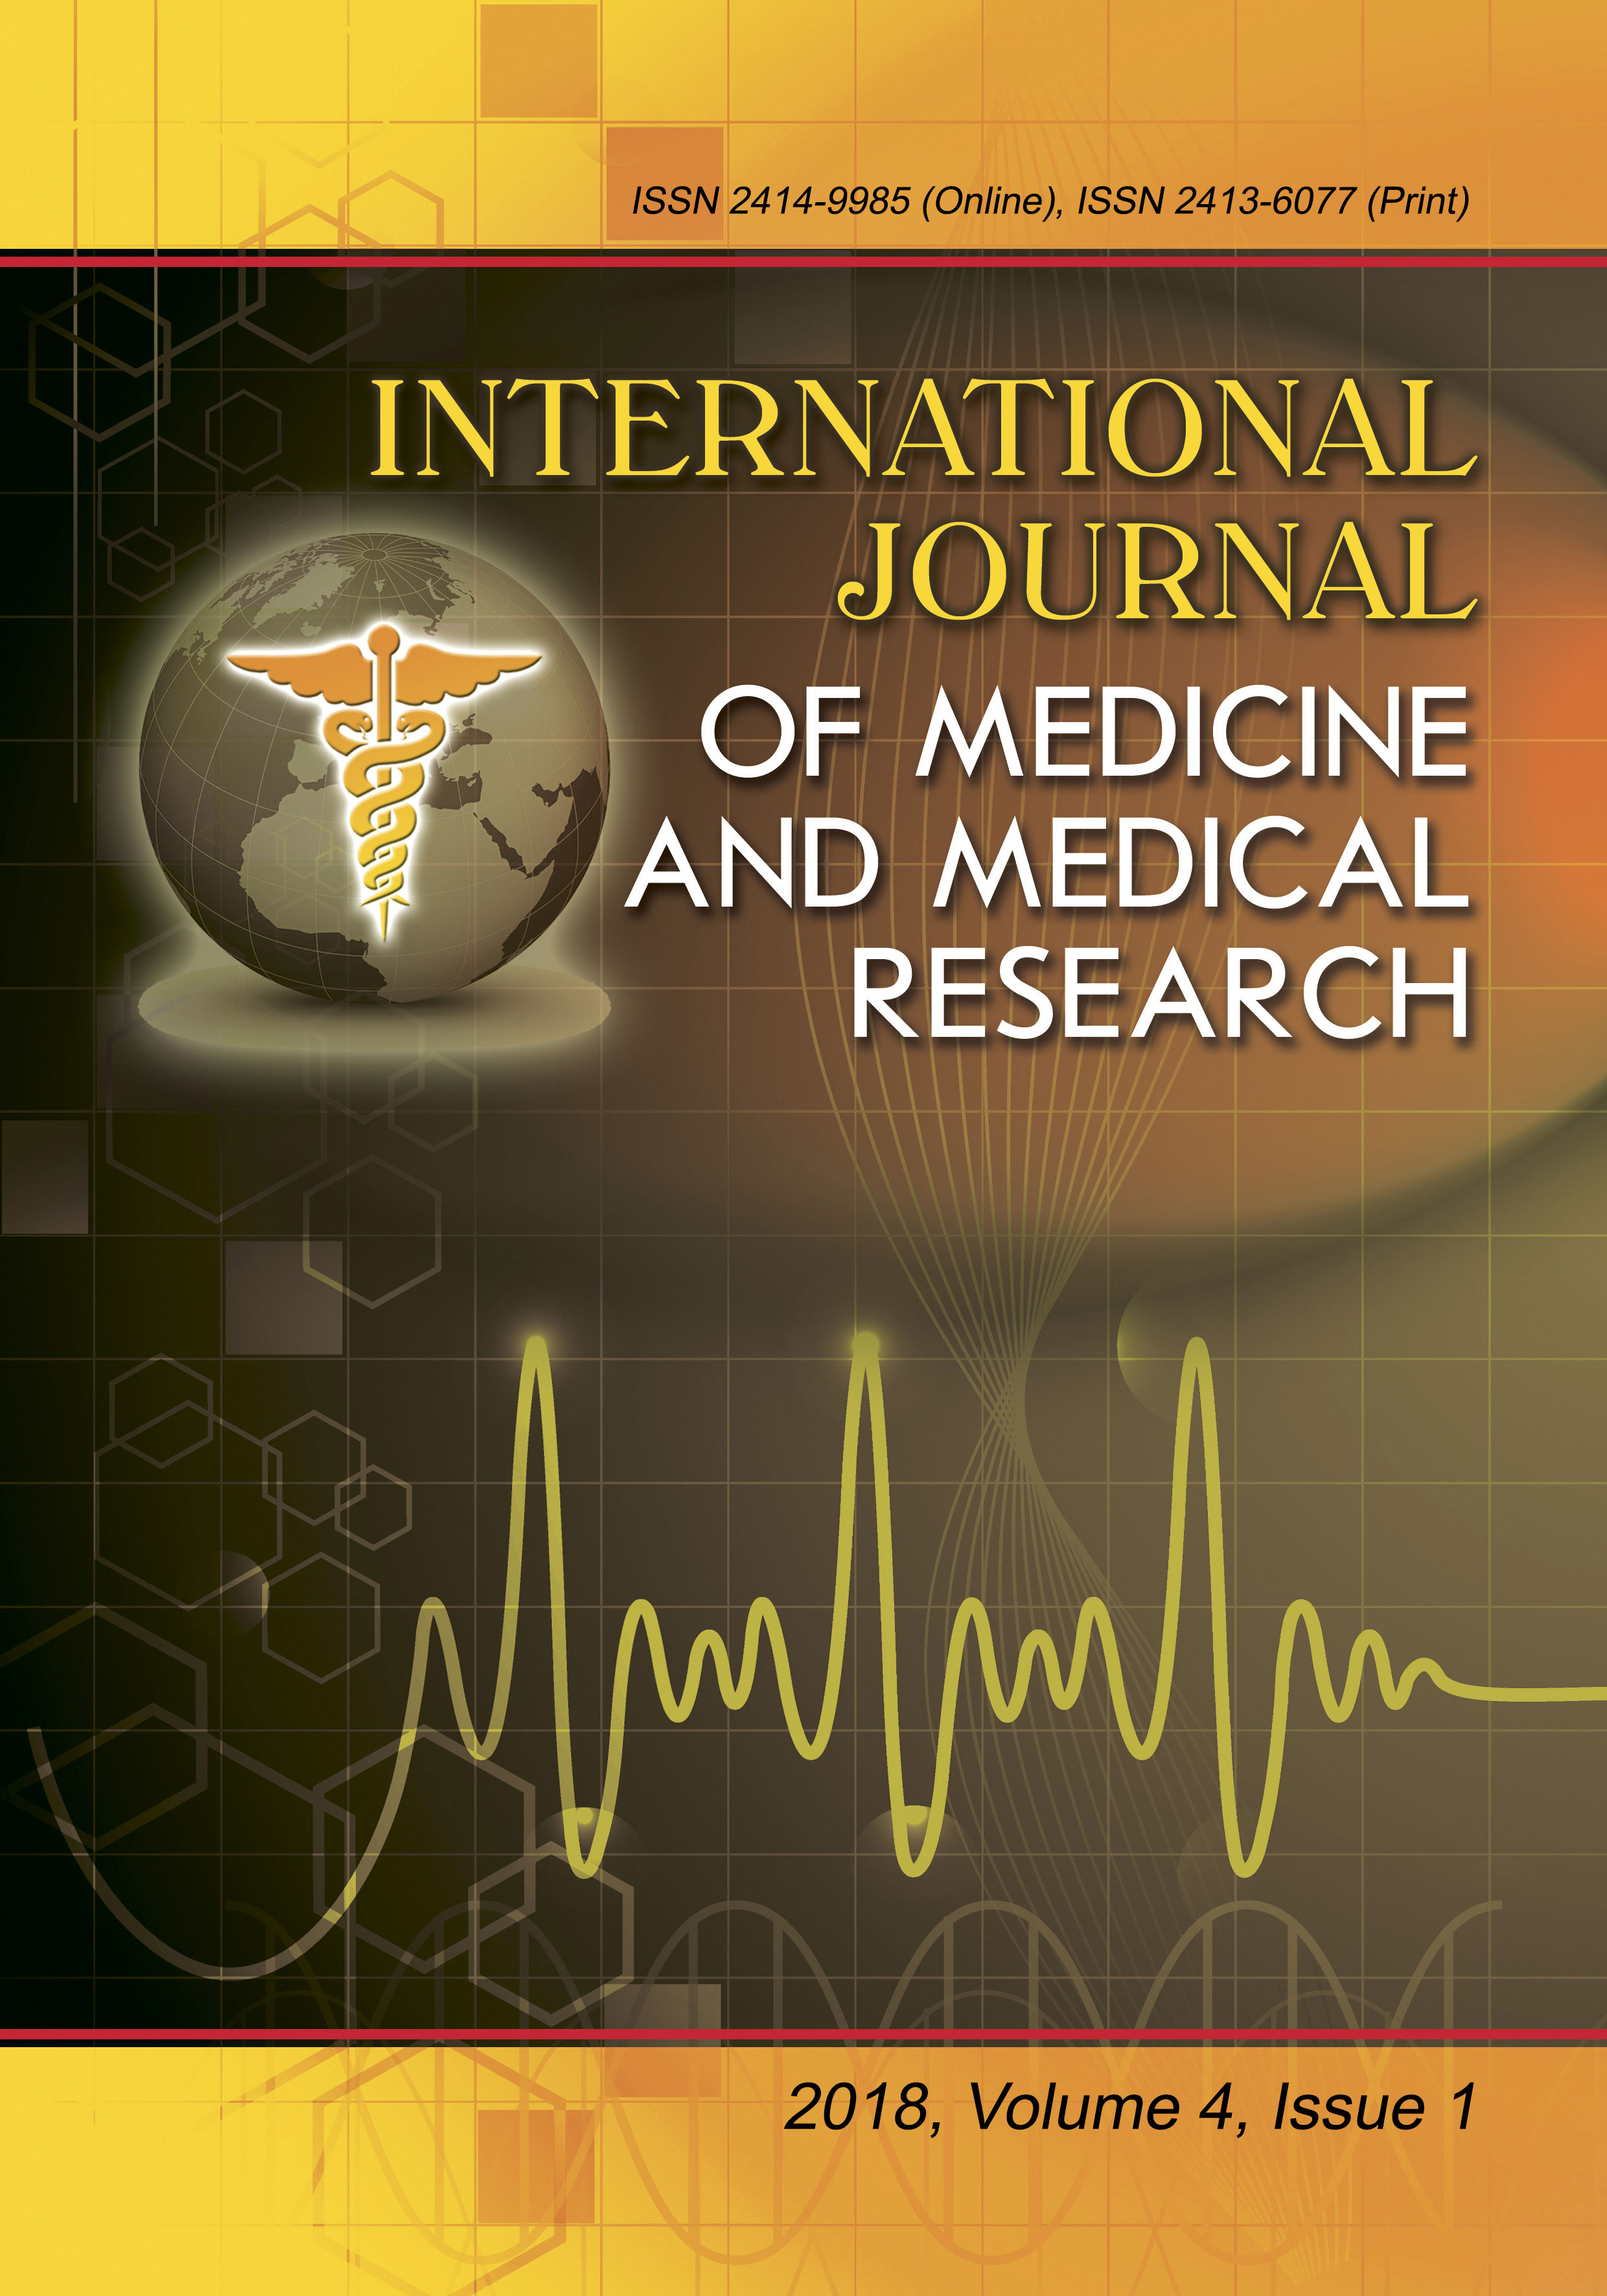 					View Vol. 4 No. 1 (2018): International Journal of Medicine and Medical Research
				